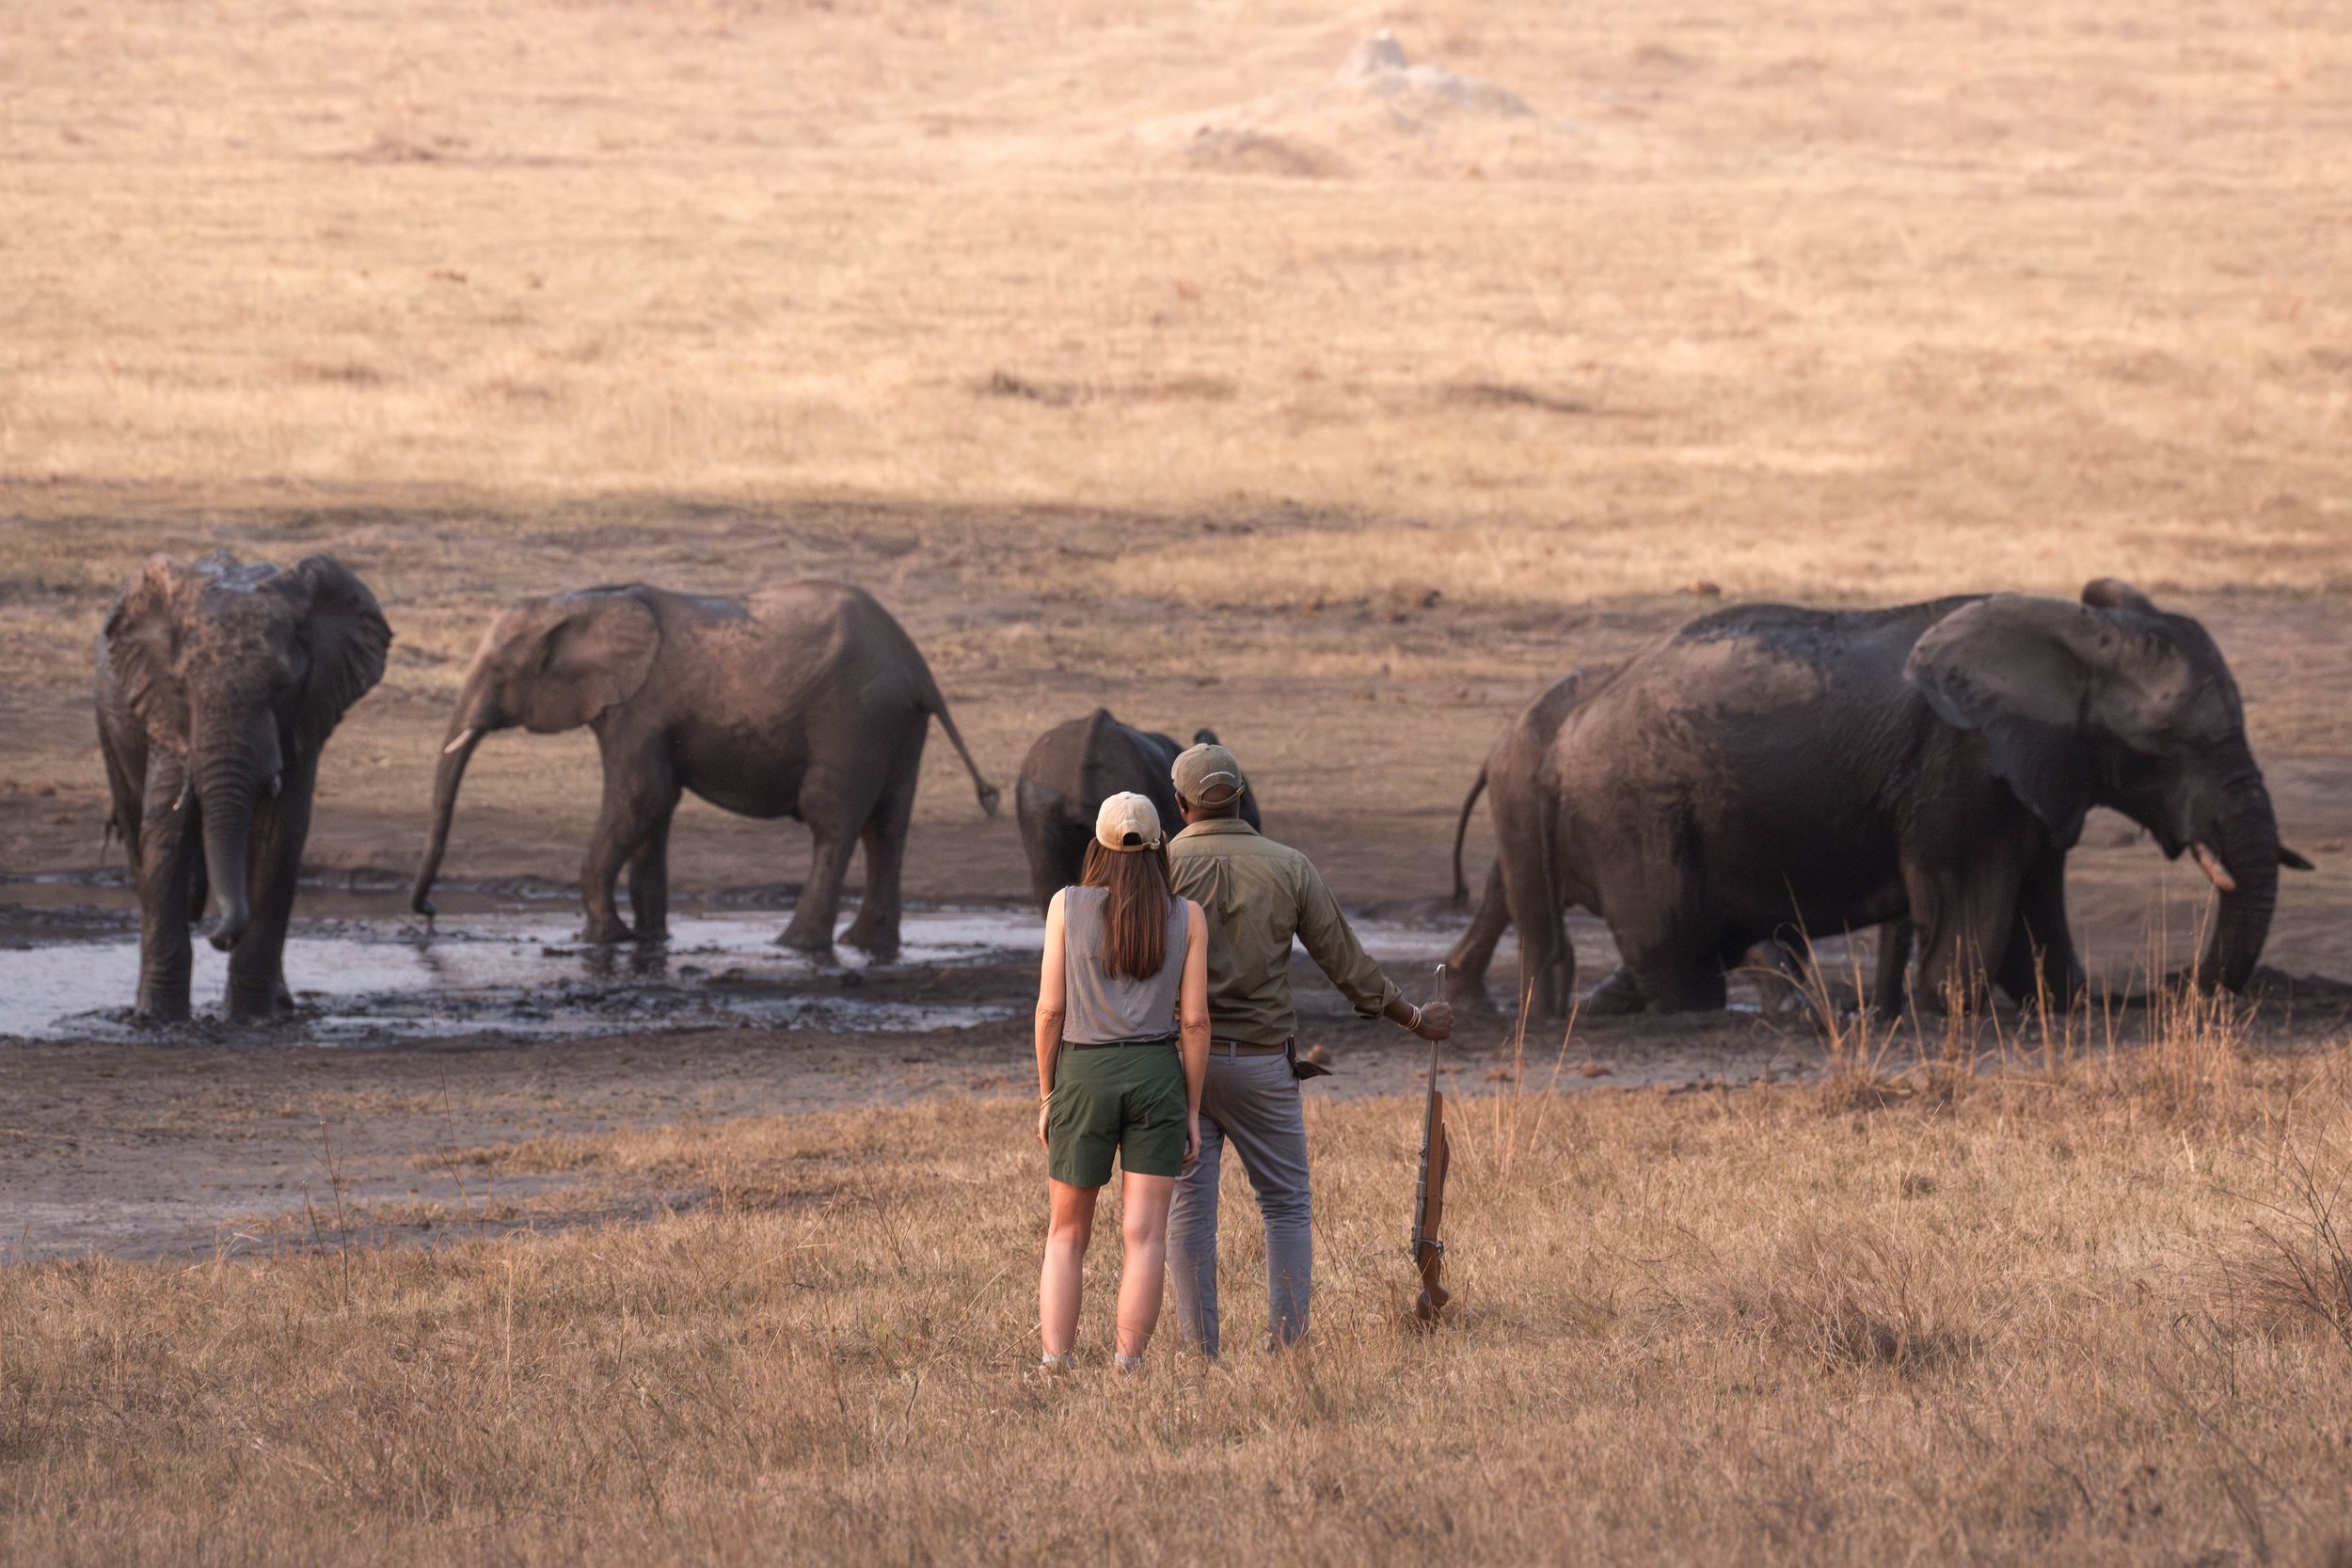 A man and woman captivated by a group of elephants.